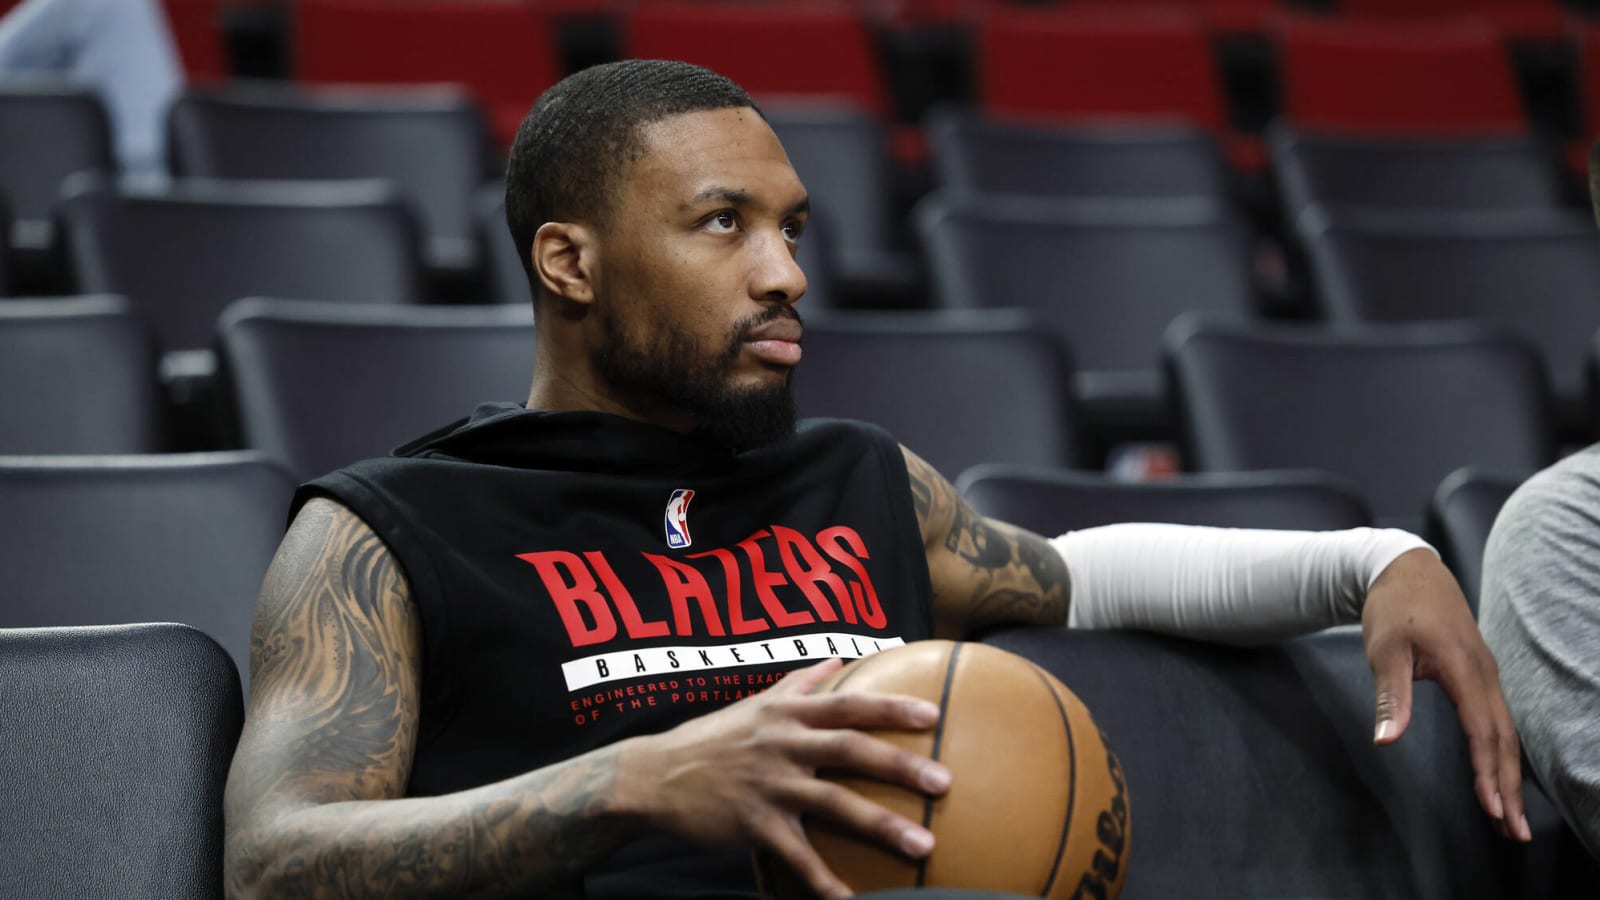 Report: Blazers passed up trades that would've satisfied Lillard